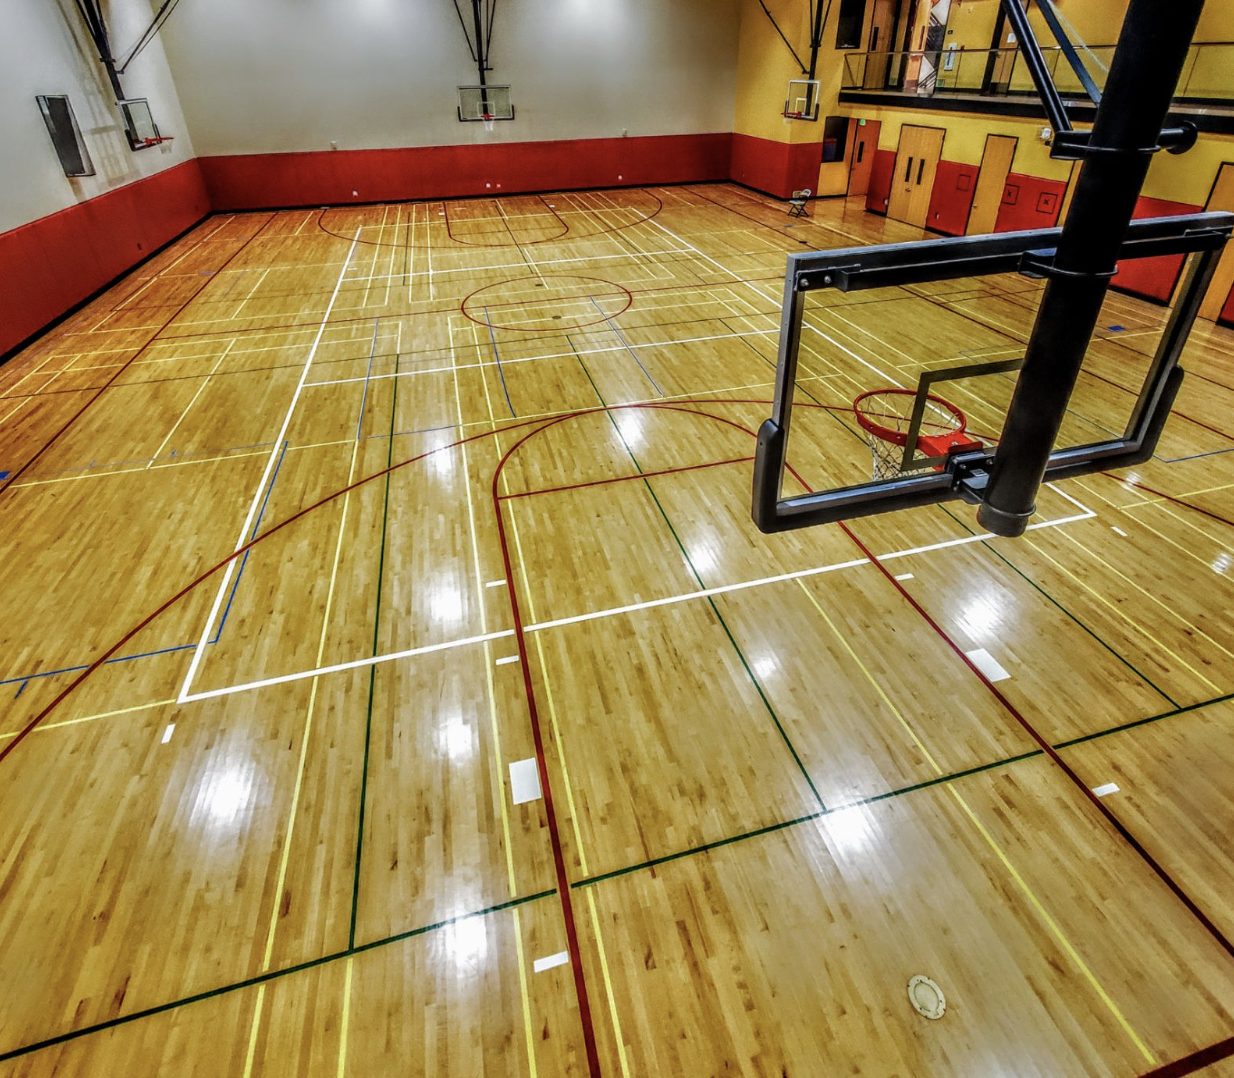 The Impact of Lower Gym Conditions on Athletes: Blurry Vision, Headaches & Safety Concerns